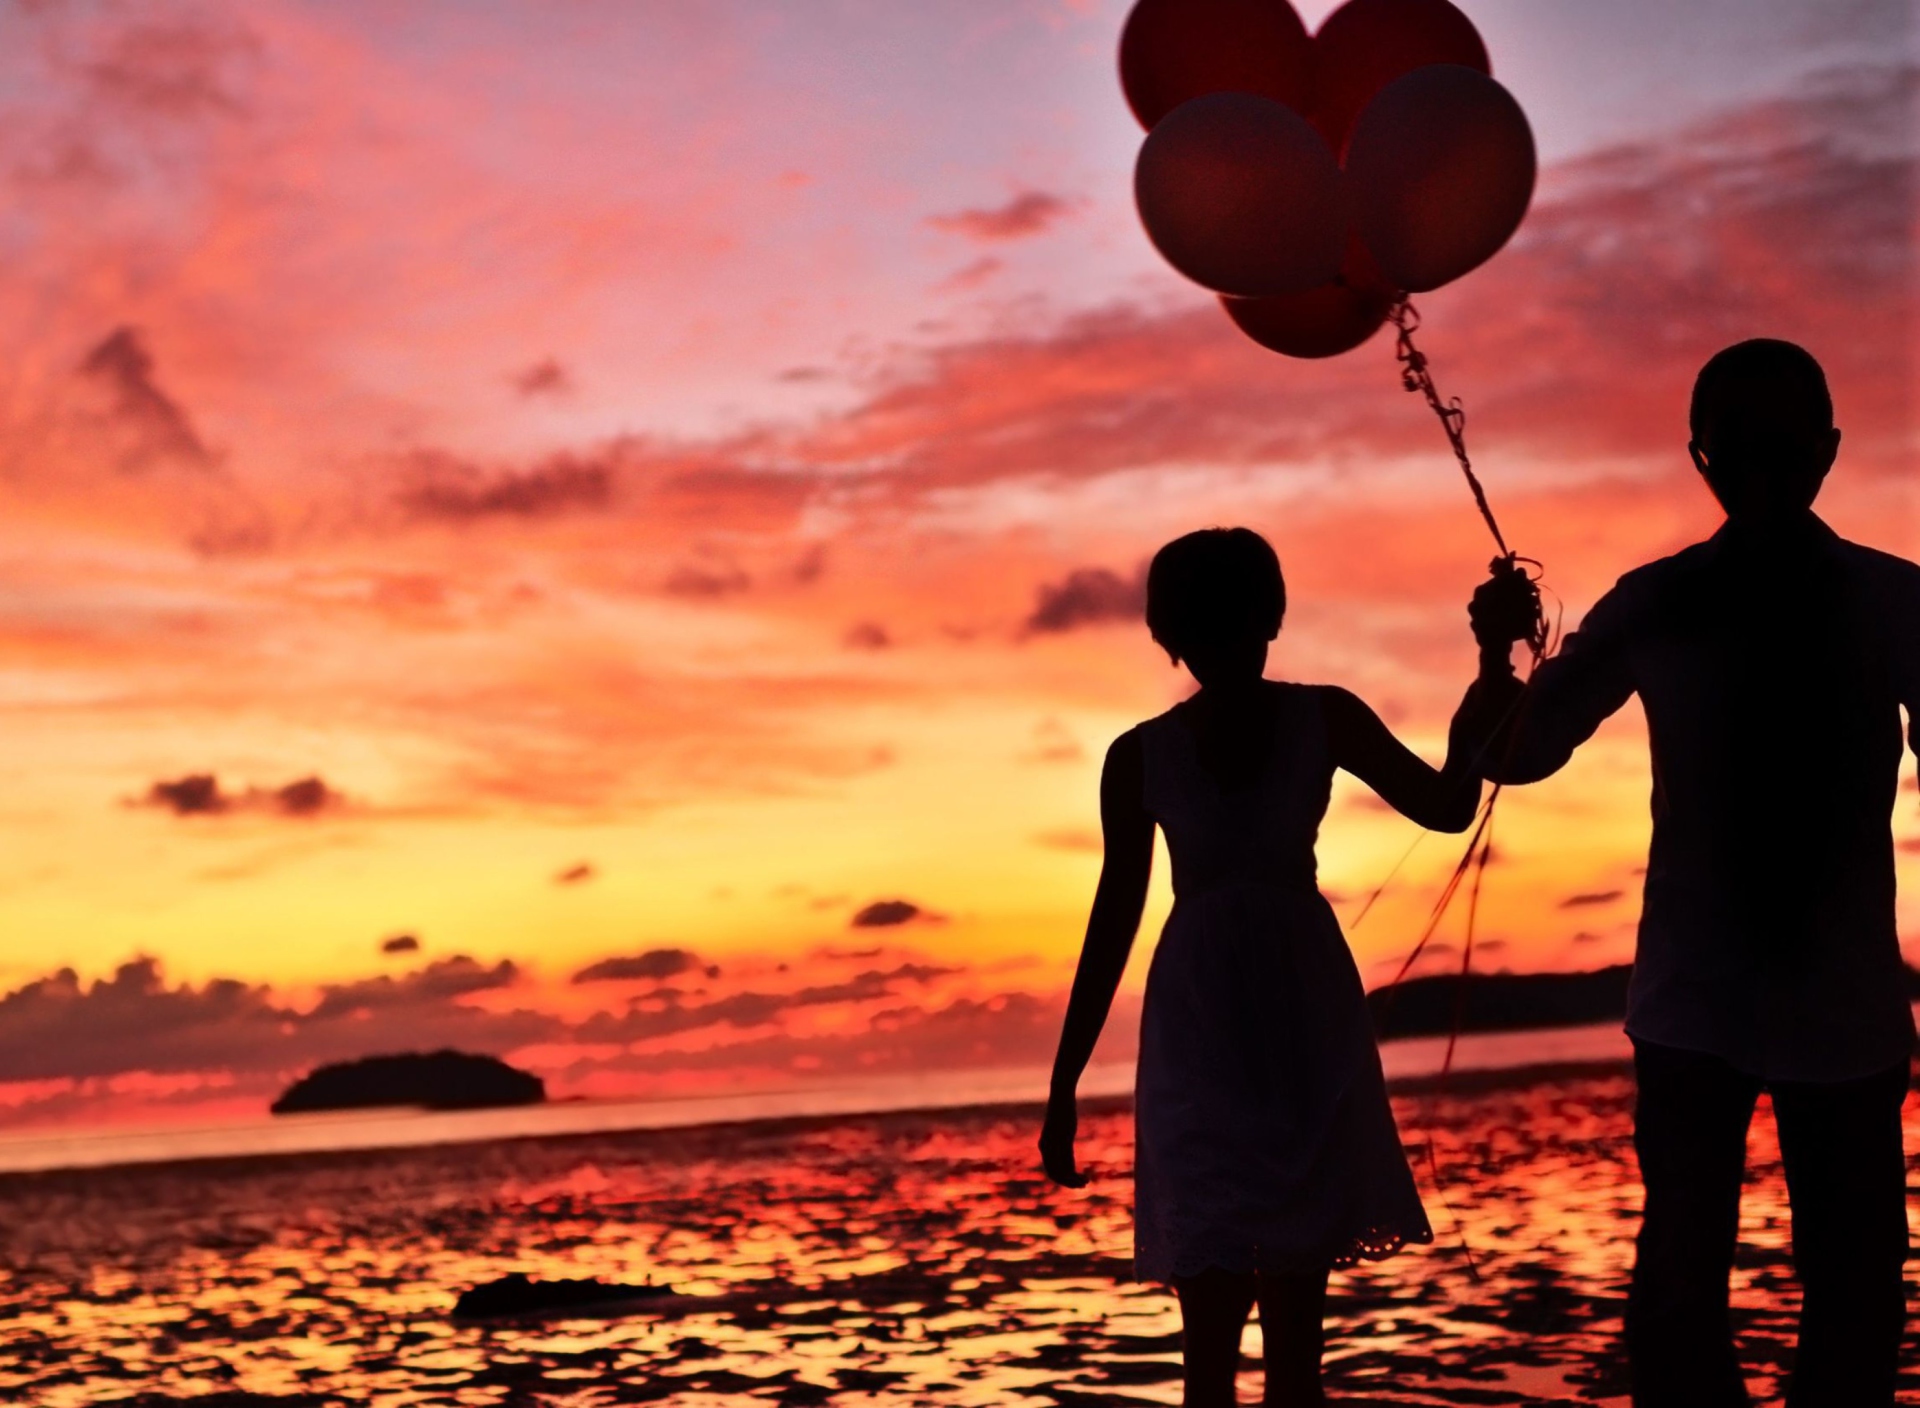 Couple With Balloons Silhouette At Sunset wallpaper 1920x1408